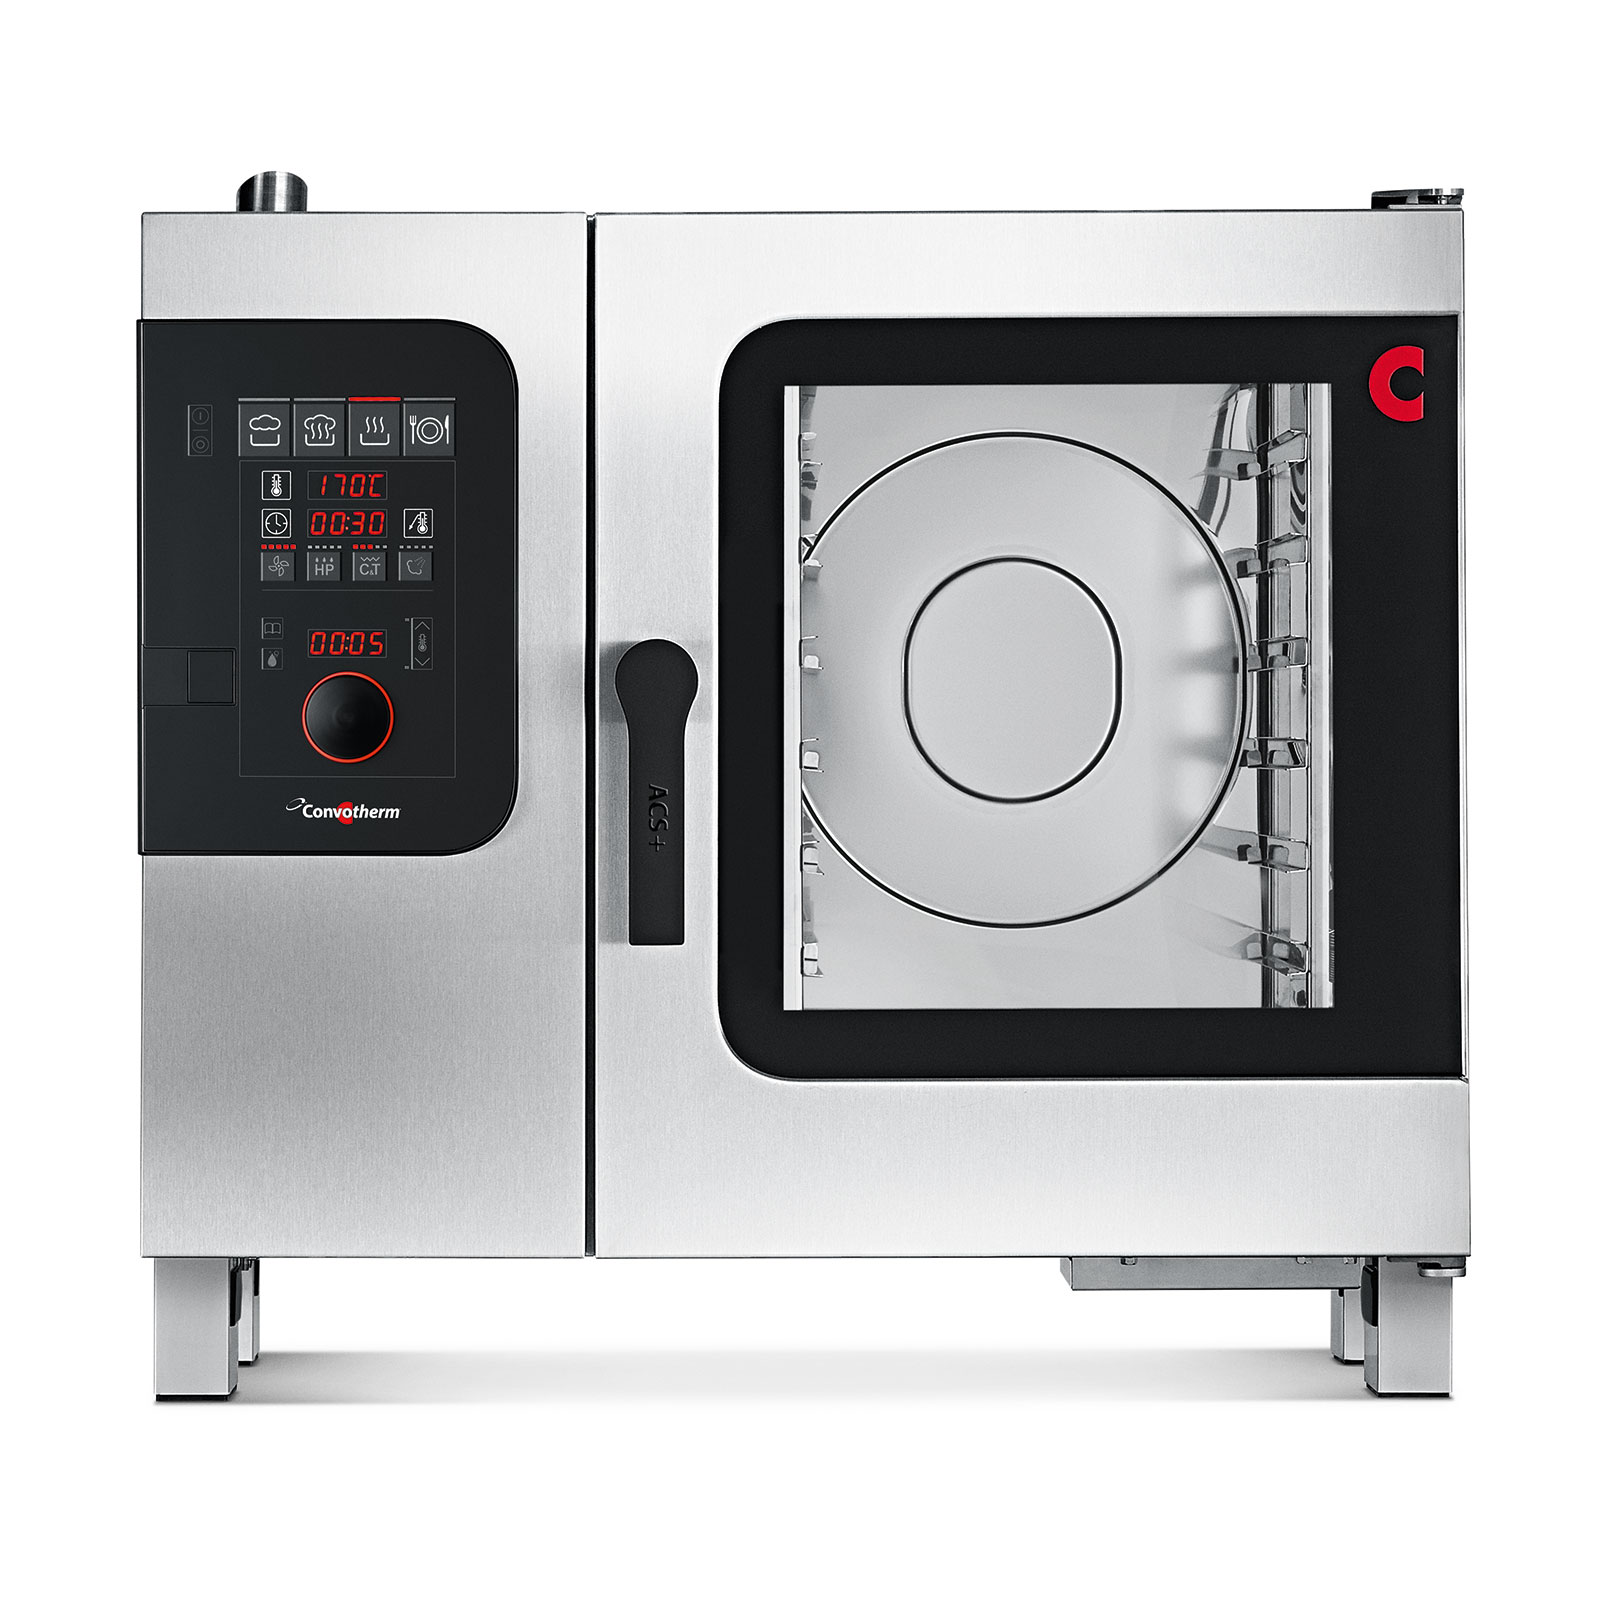 Convotherm C4 ED 6.10GB Half-Size Gas Combi Oven w/ Programmable Controls, Steam Generator